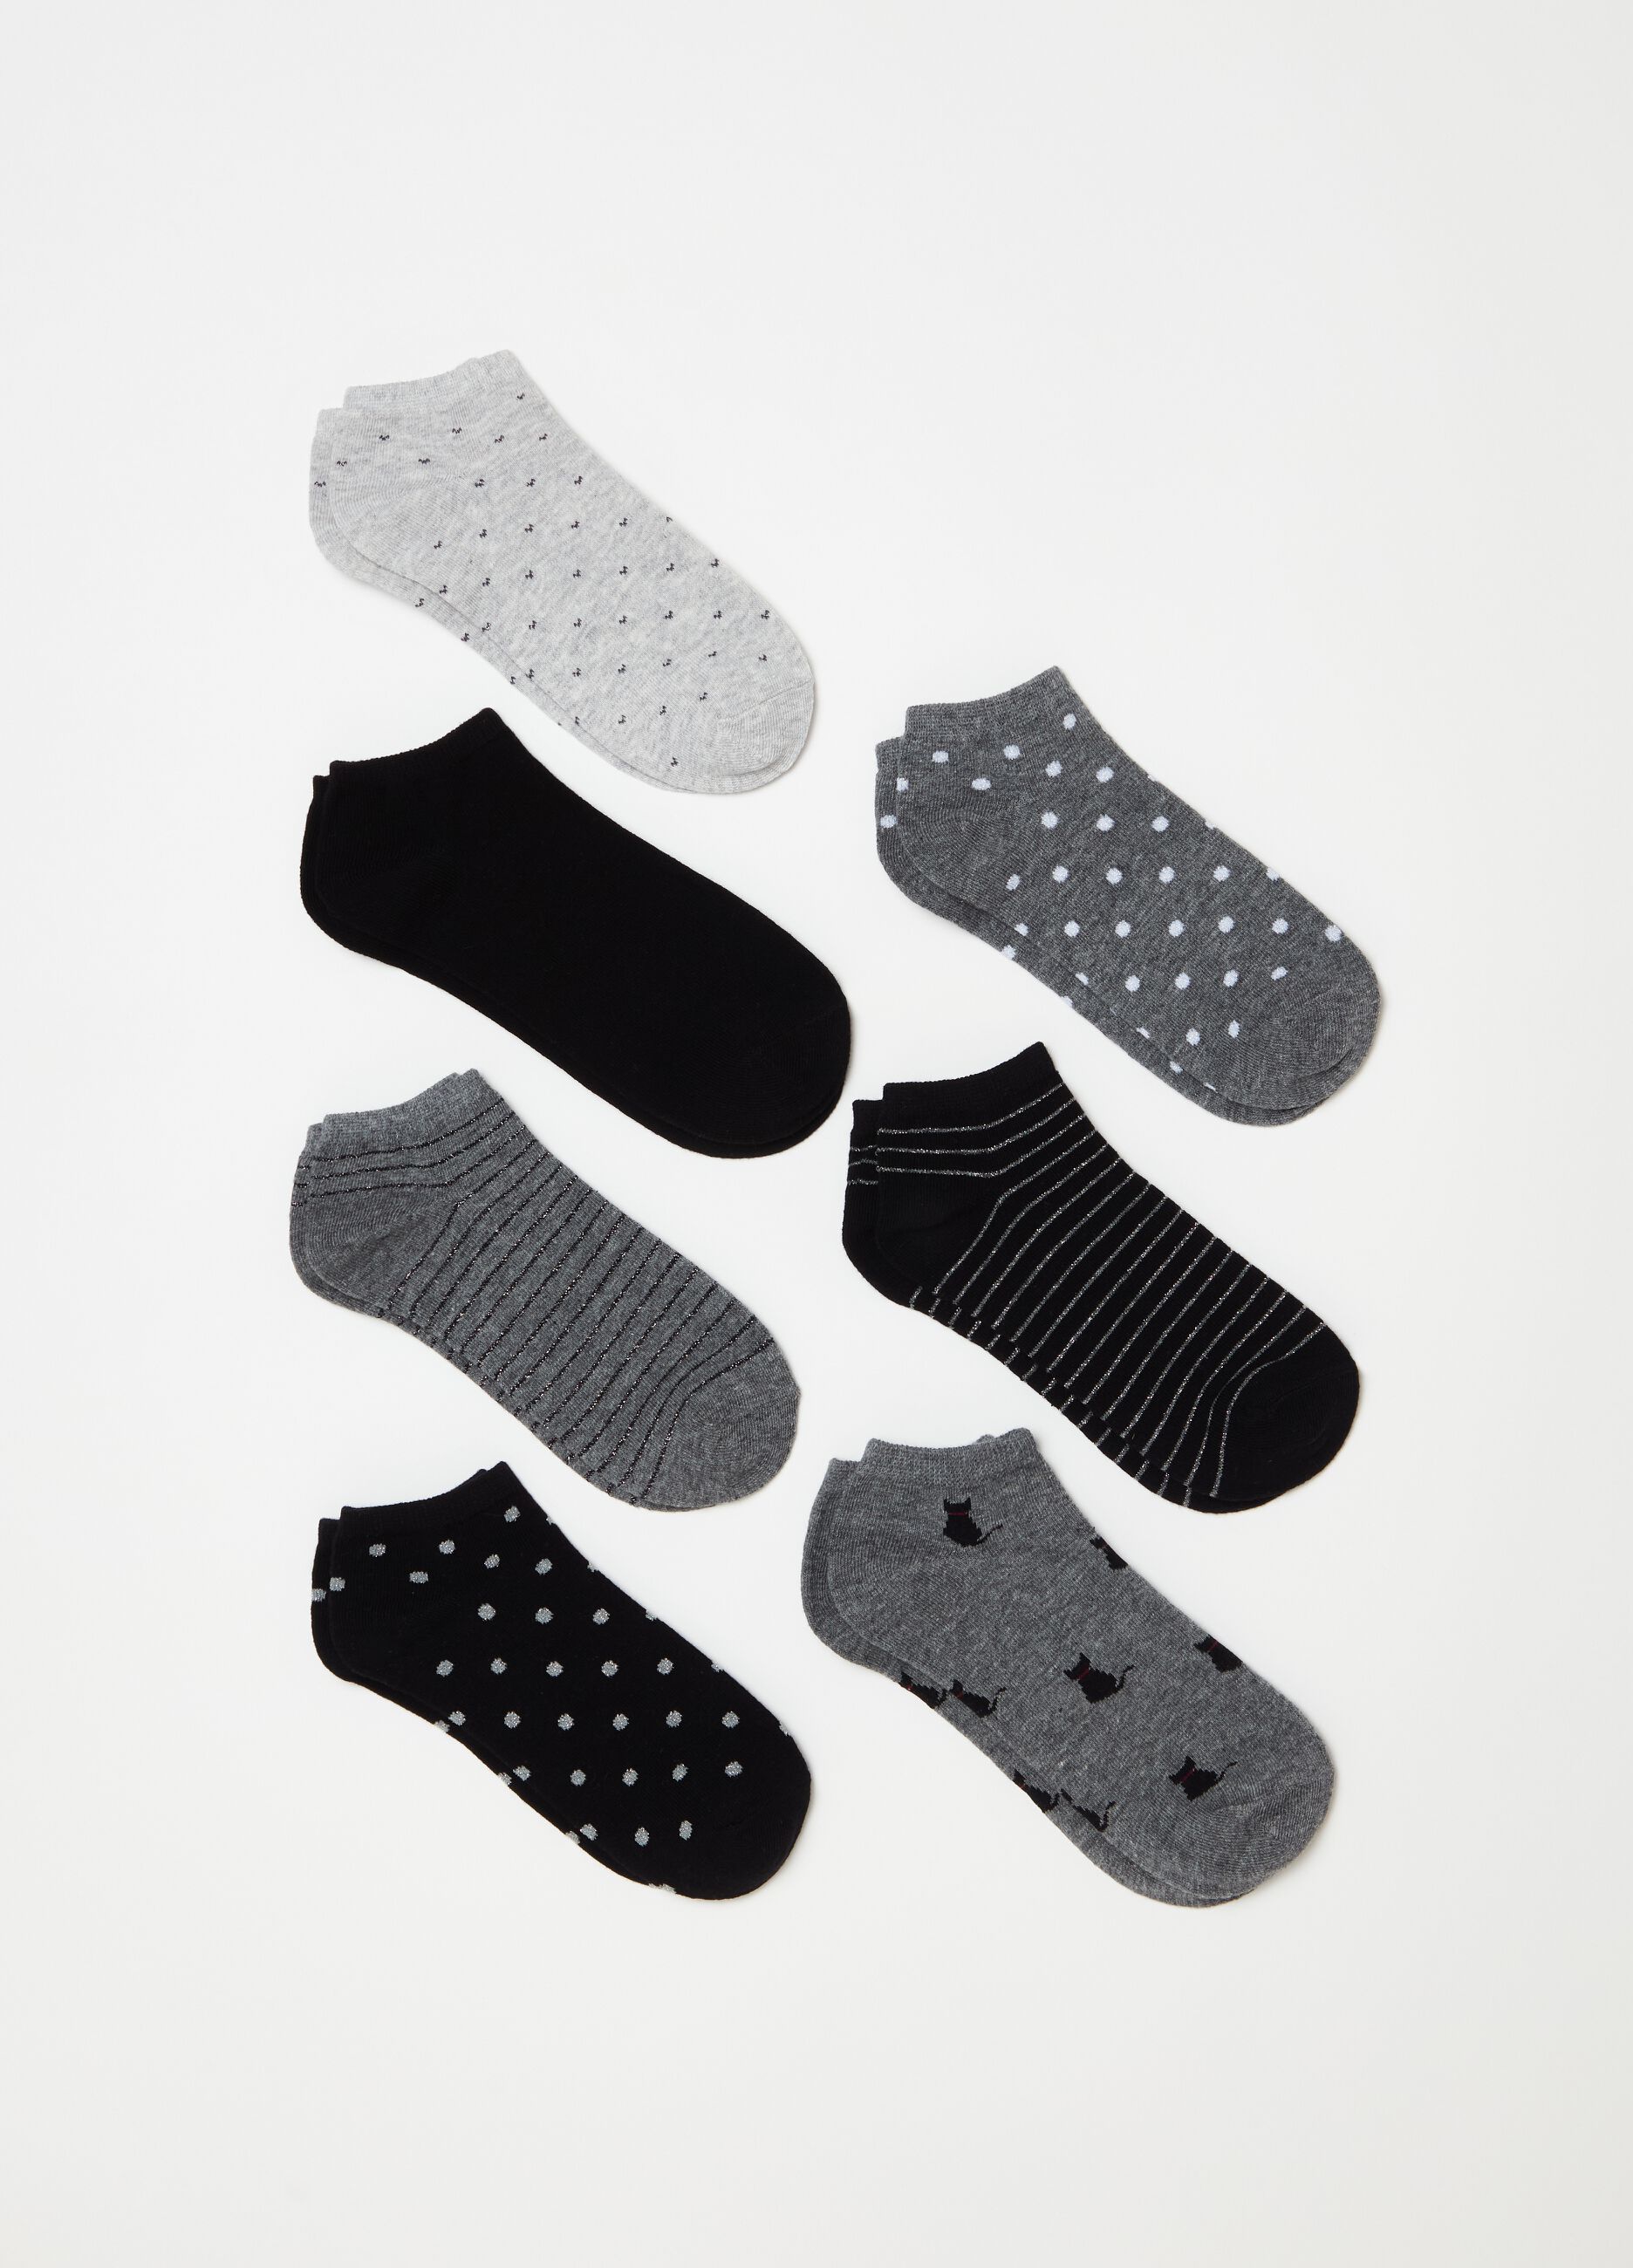 Seven-pair pack of shoe liners with designs